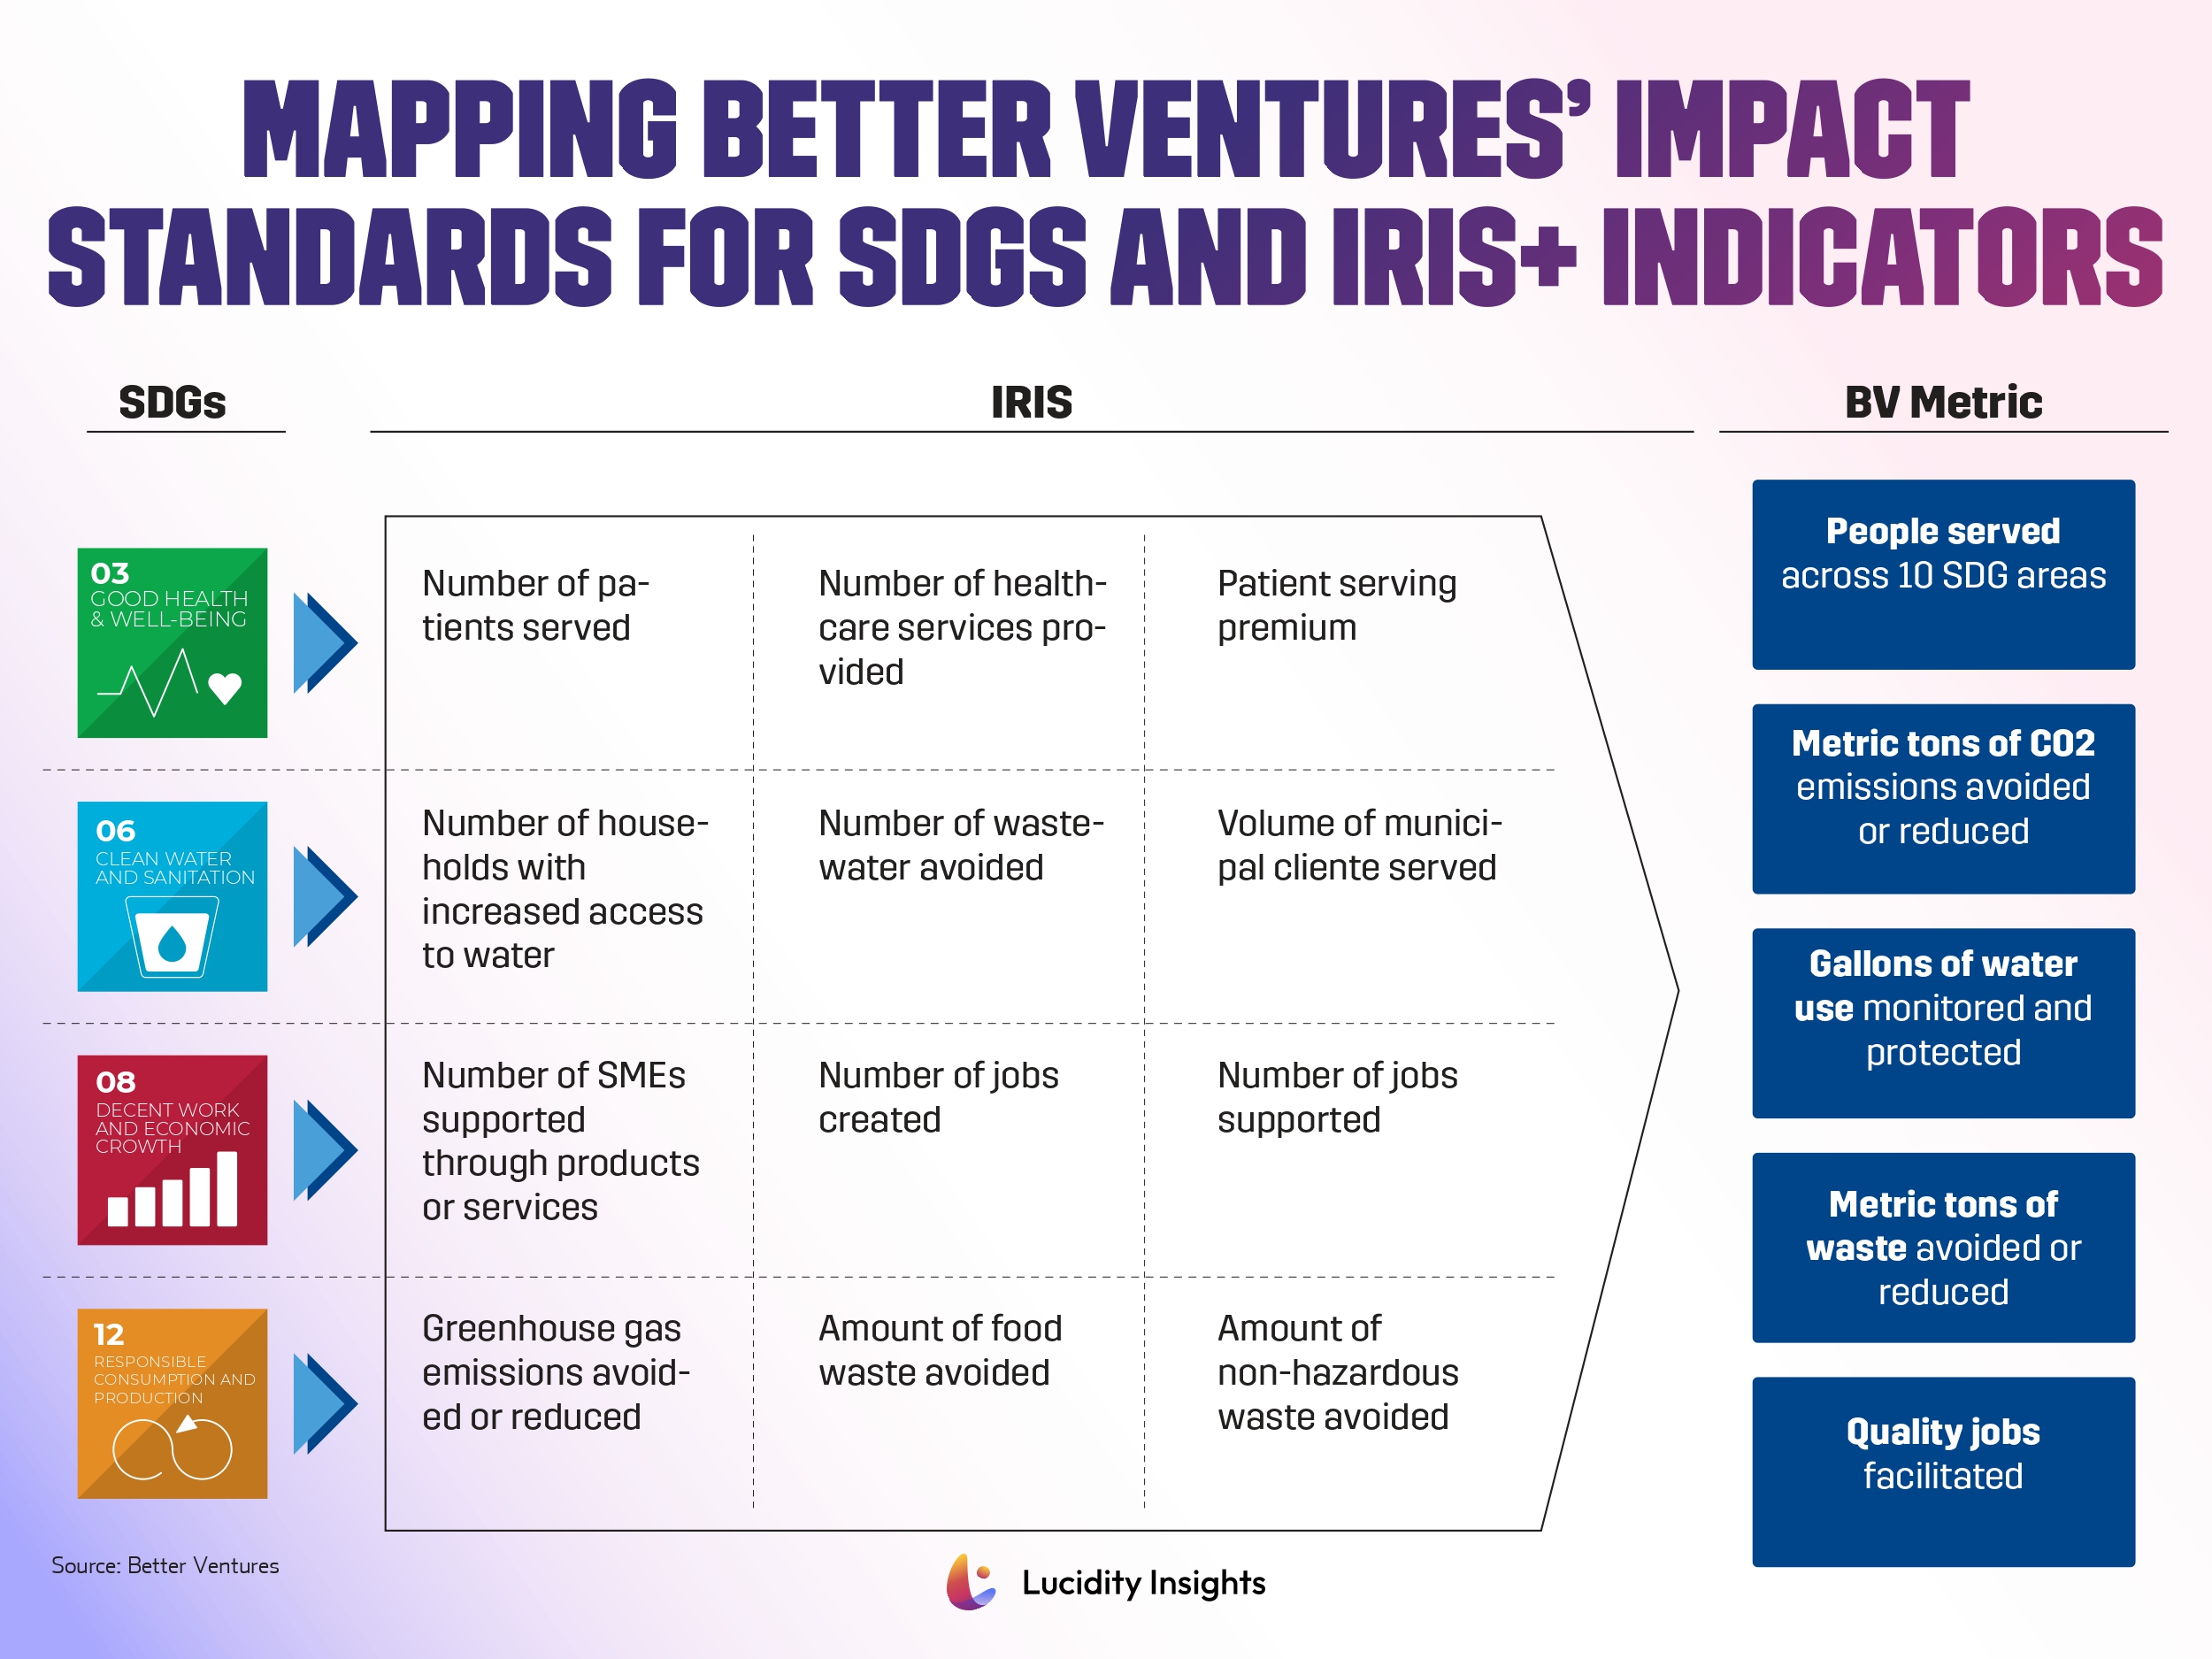 Mapping Better Ventures’ Impact Standards for SDGs and IRIS+ Indicators